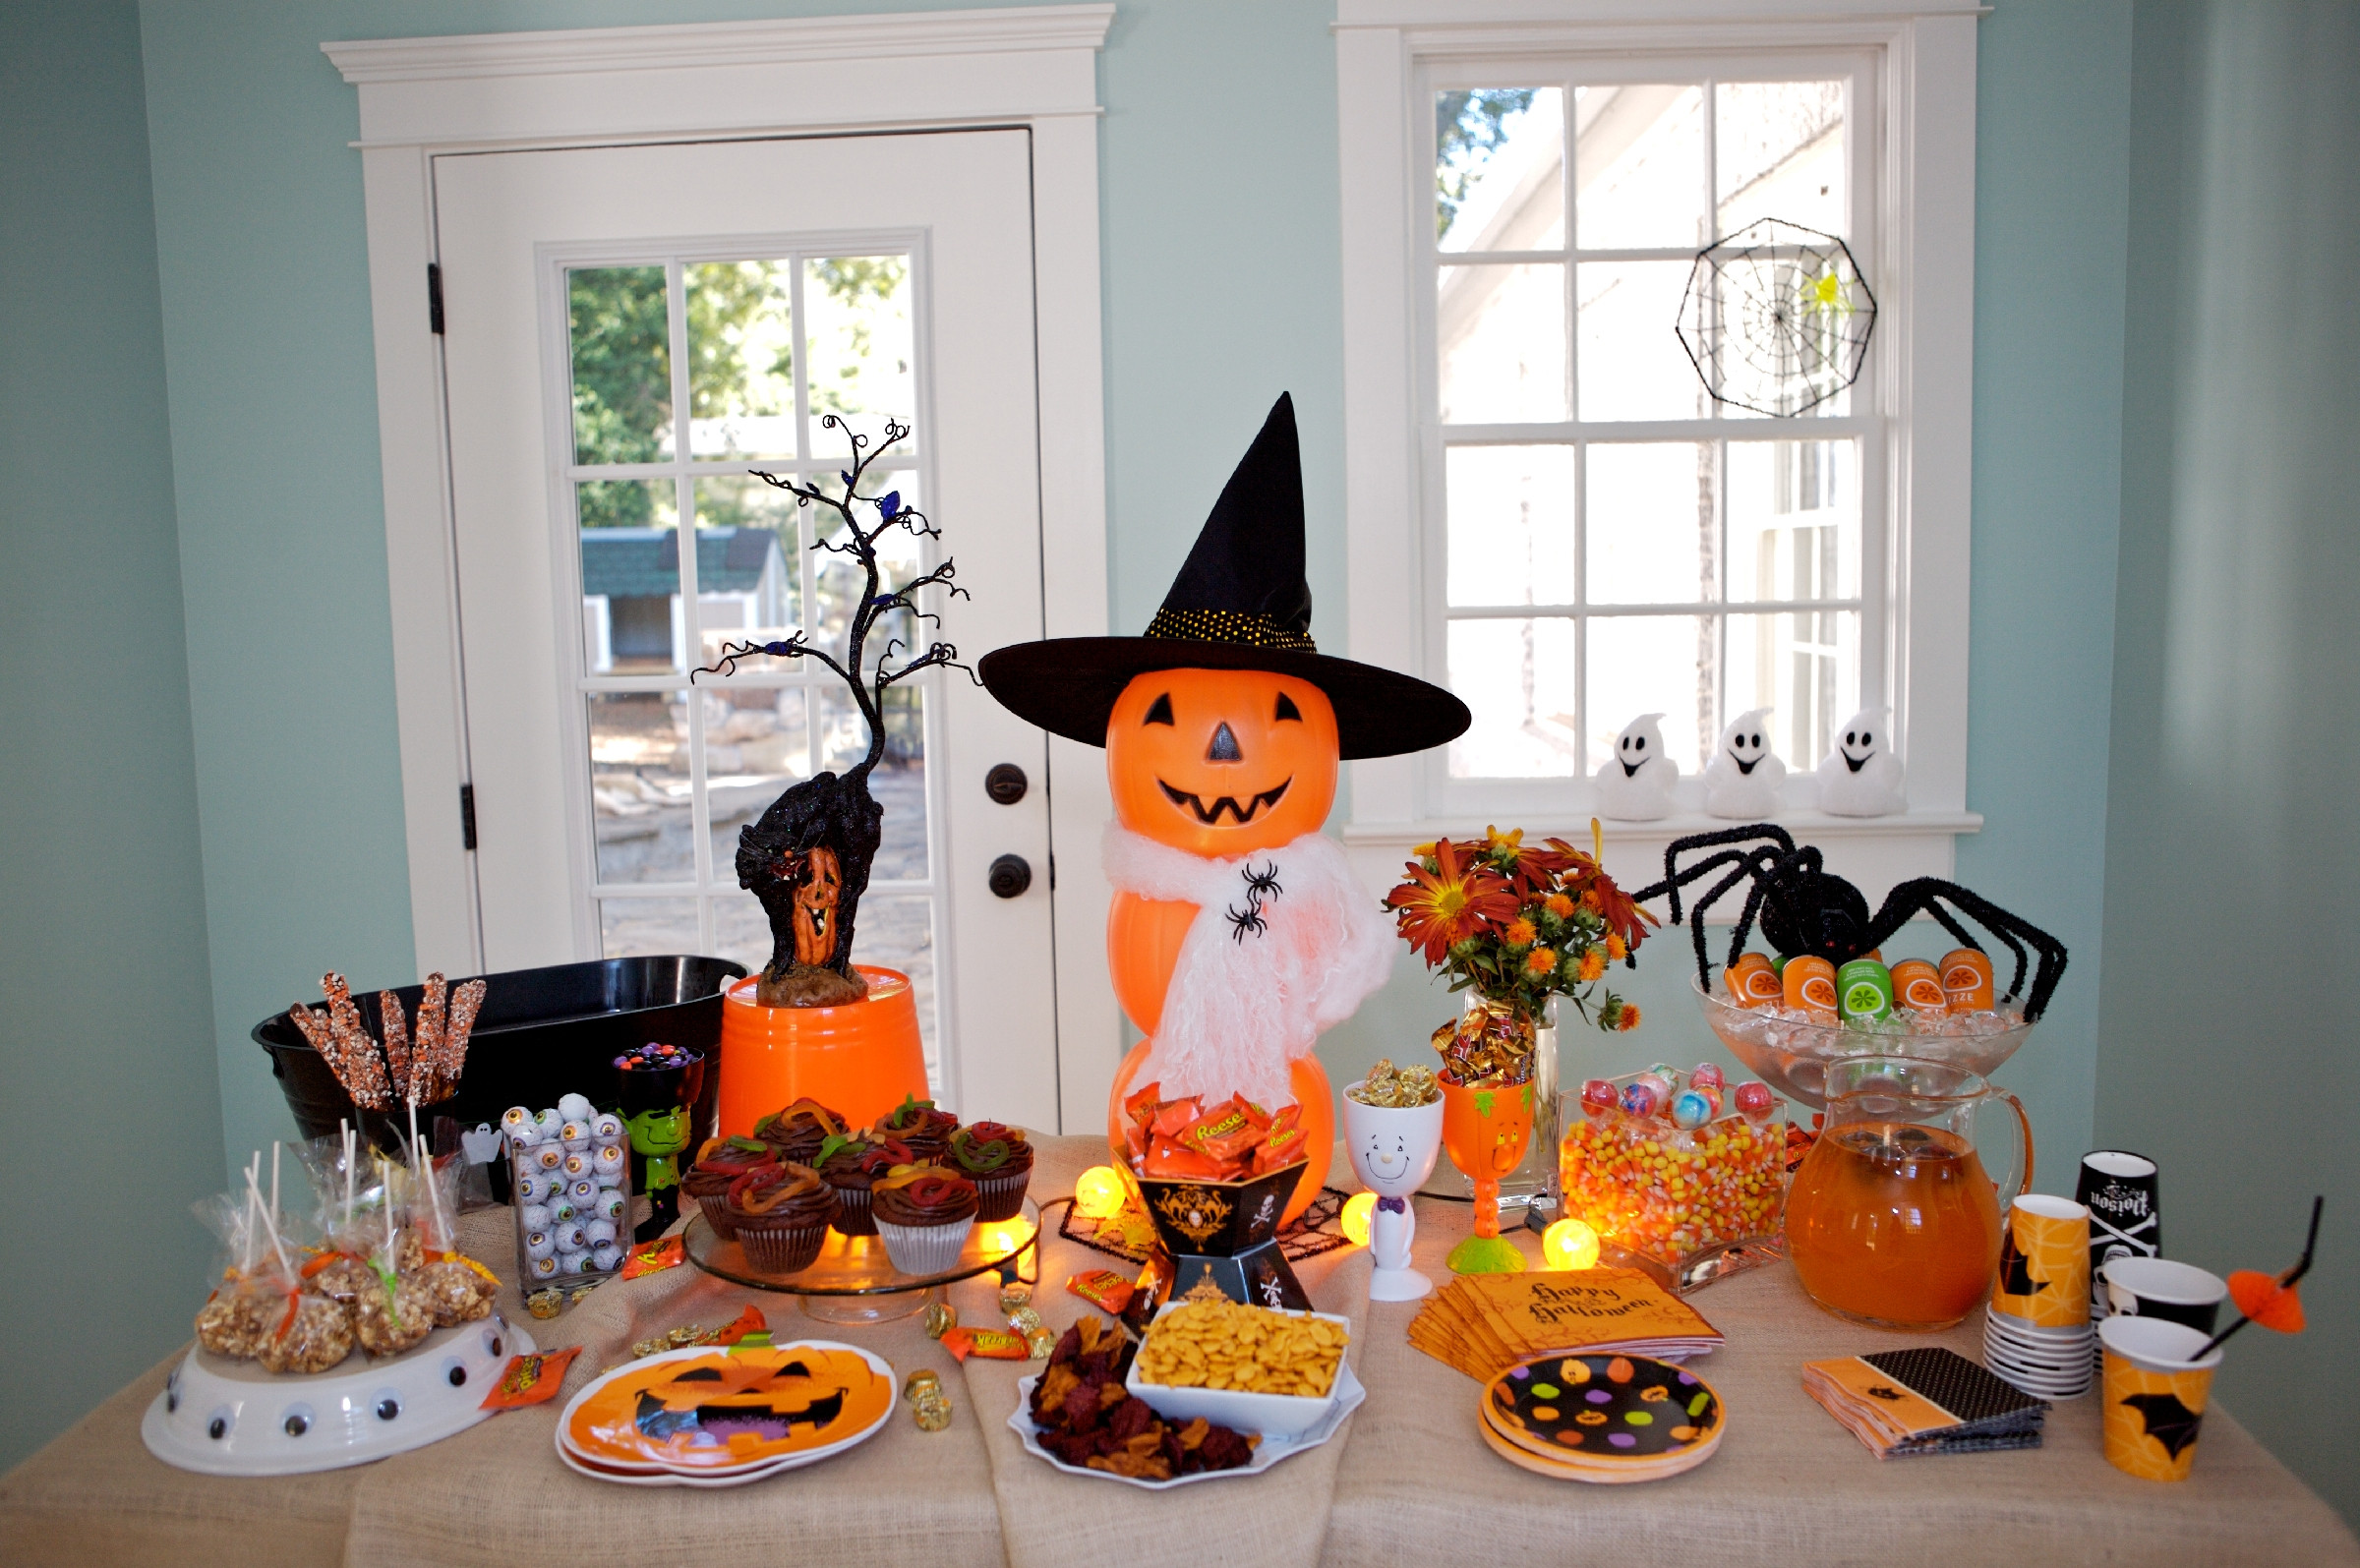 Table Decorating Ideas For Halloween Party
 Martie Knows Parties BLOG Host a Neighborhood